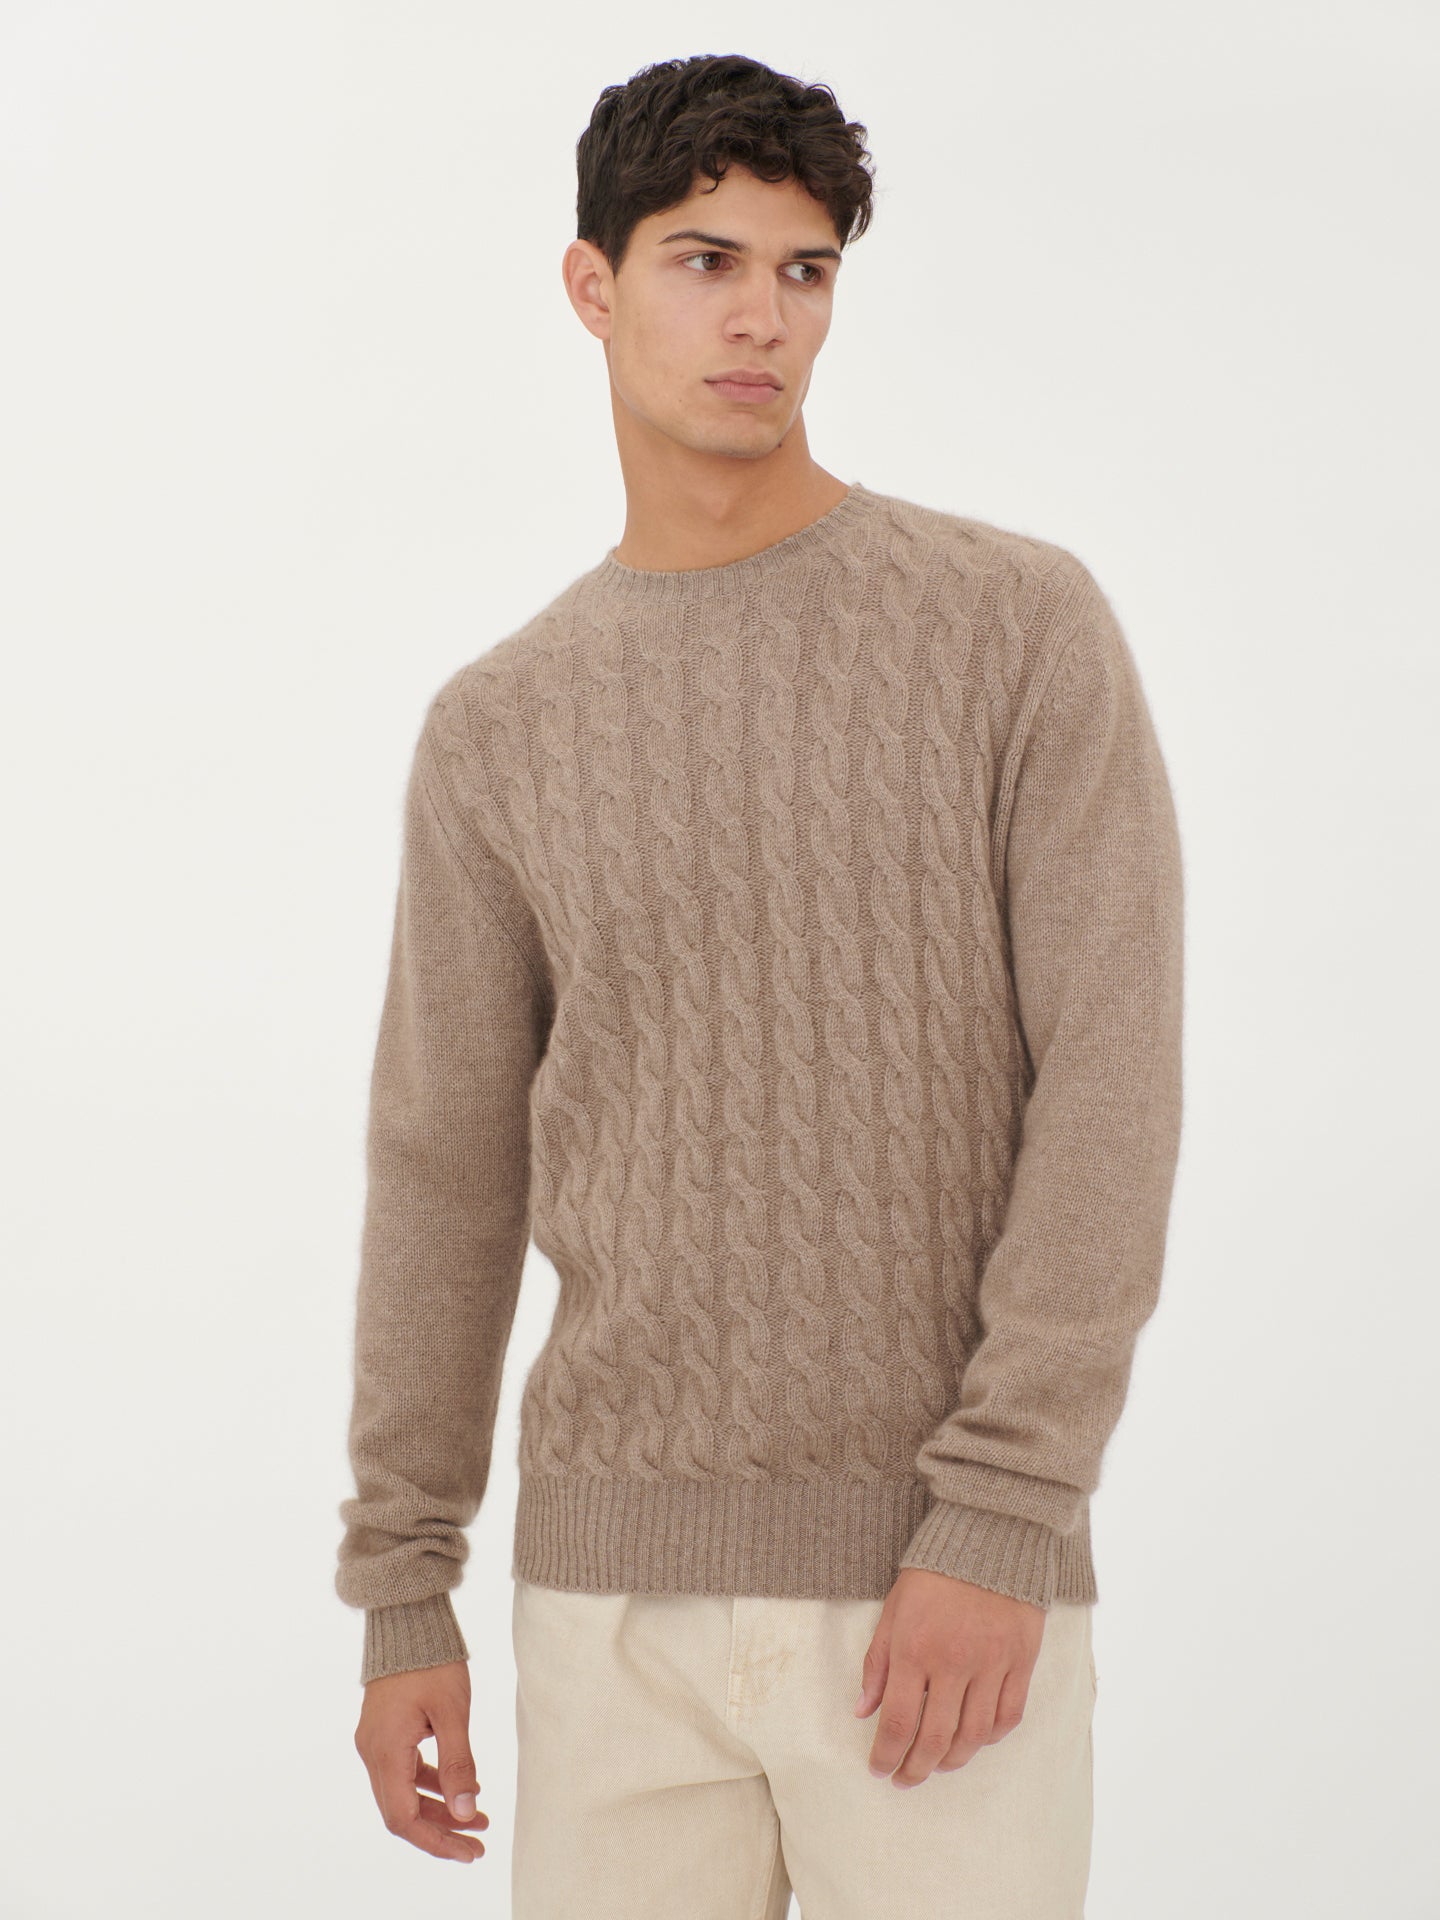 Cable-Knit Cashmere Sweater, Crewneck Sweaters